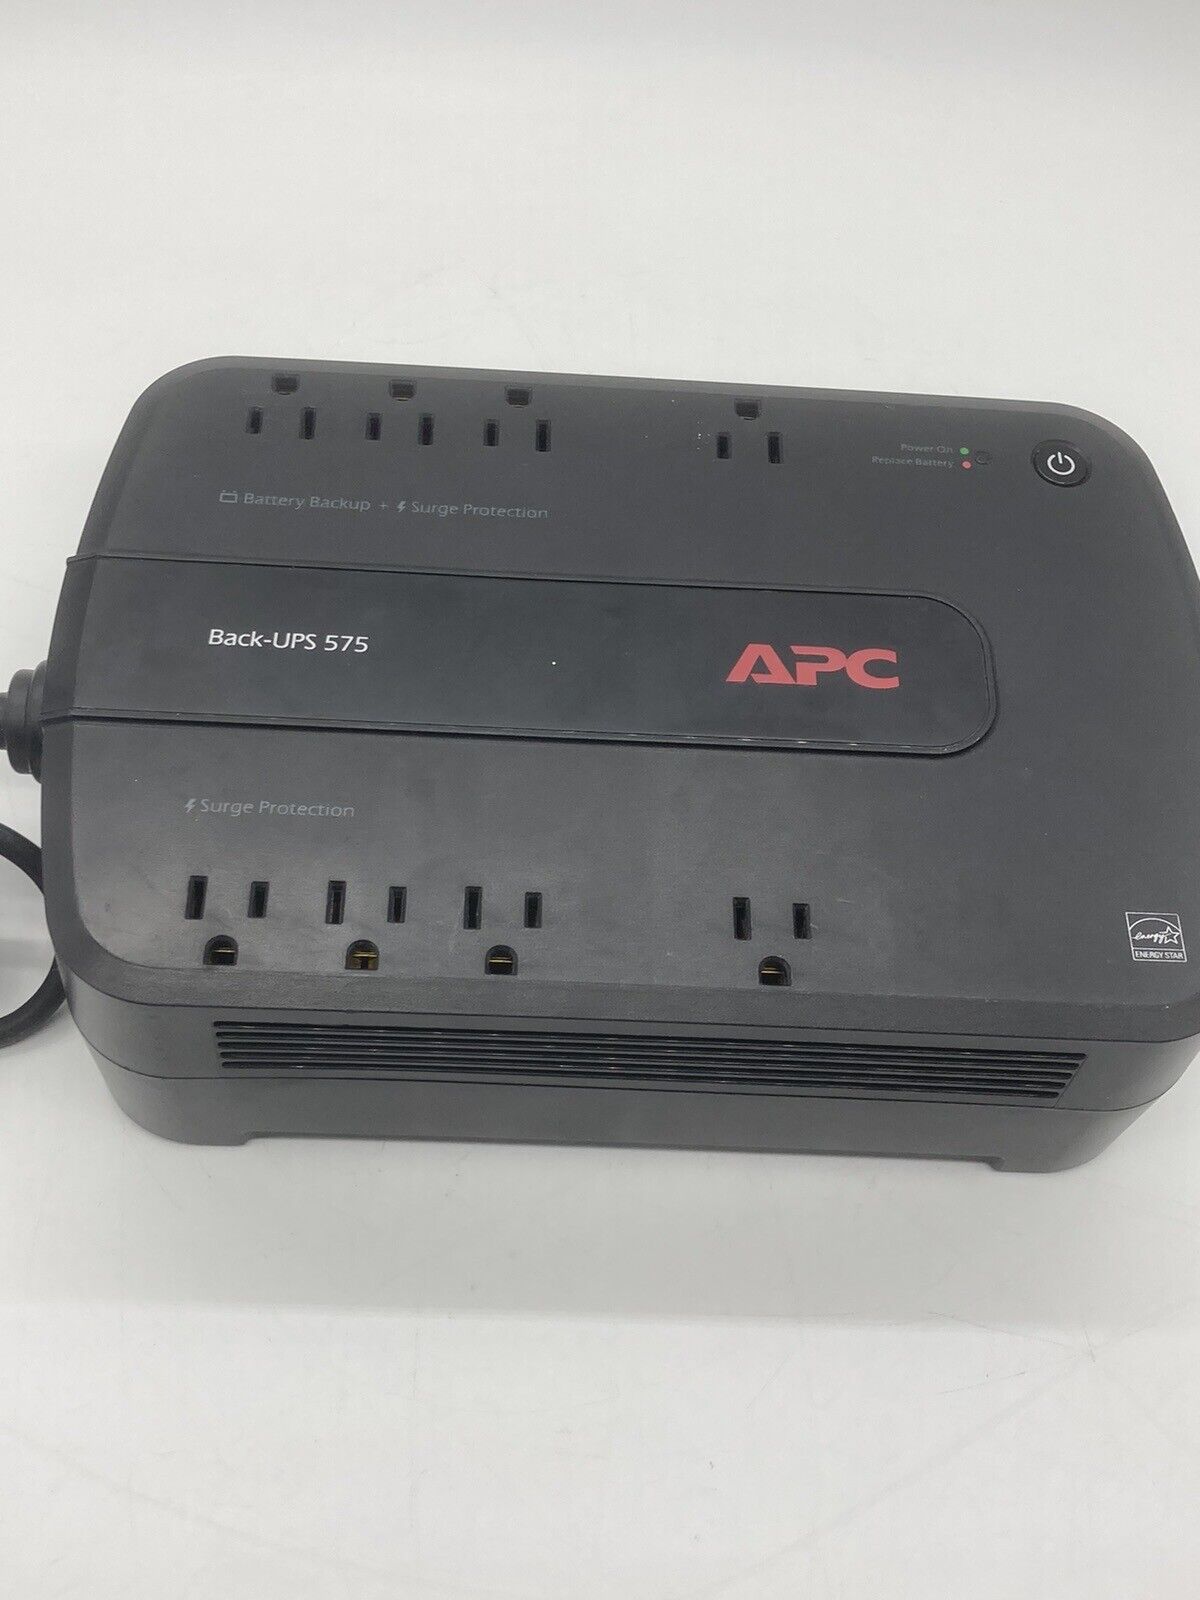 APC Back-UPS 575 BN575G 8 Outlets Uninterruptible Power Supply Tested Works